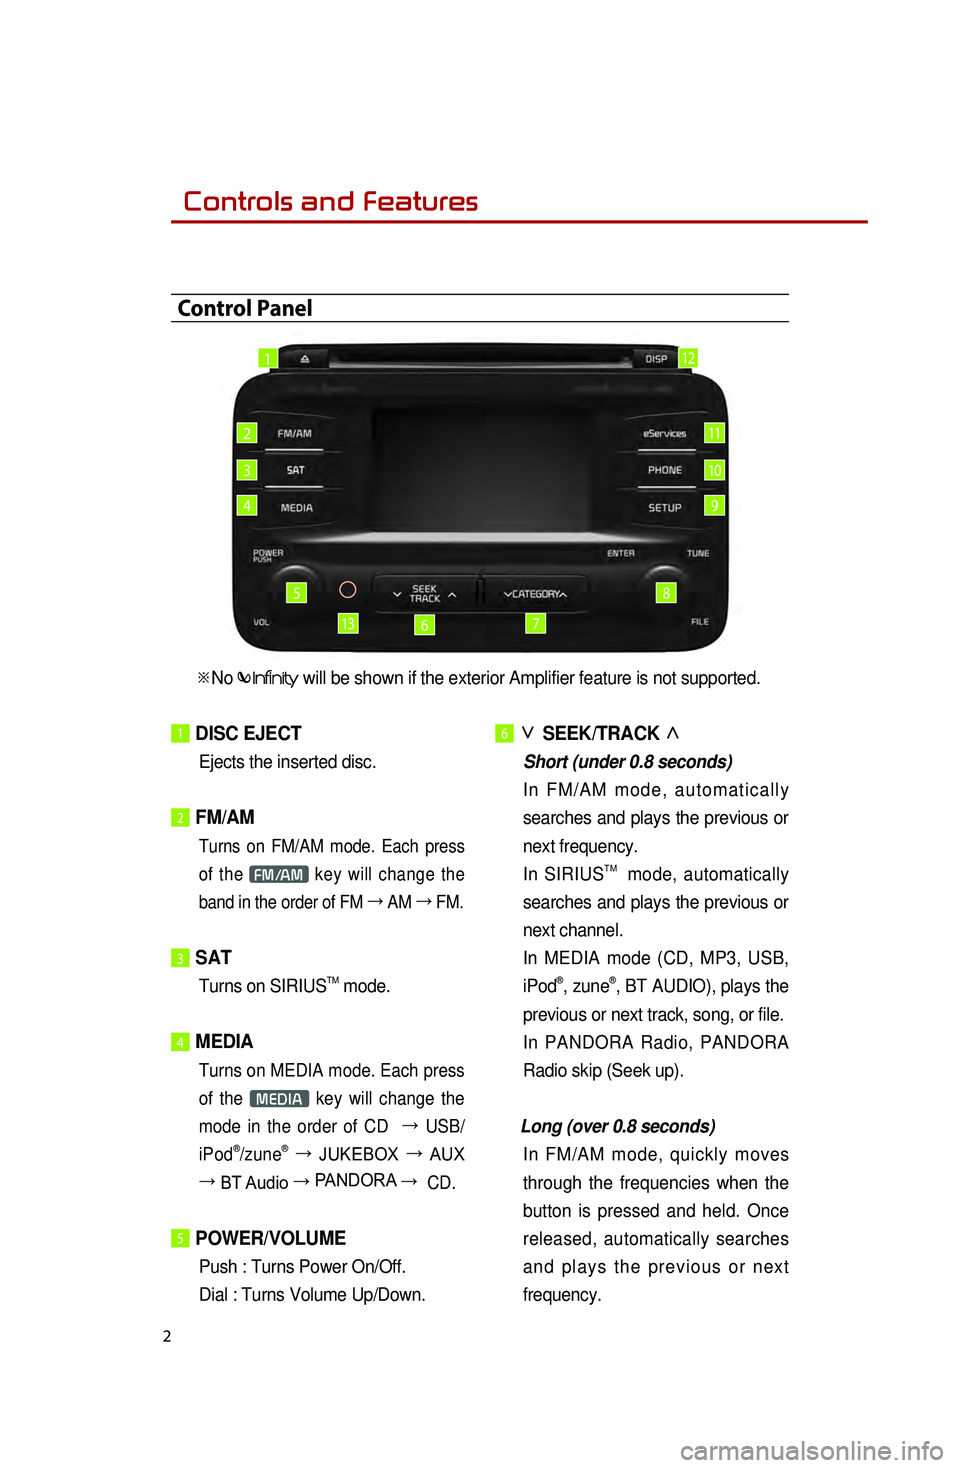 KIA OPTIMA 2015  Quick Reference Guide 2
1 DISC  EJECT
Ejects the inserted disc.
 
2 FM/AM
 Turns on FM/AM mode. Each press 
of the 
FM/AM key will change the 
band in the order of FM  →
 AM  →
 FM.
3 SAT
Turns on SIRIUSTM  mode. 
4 ME